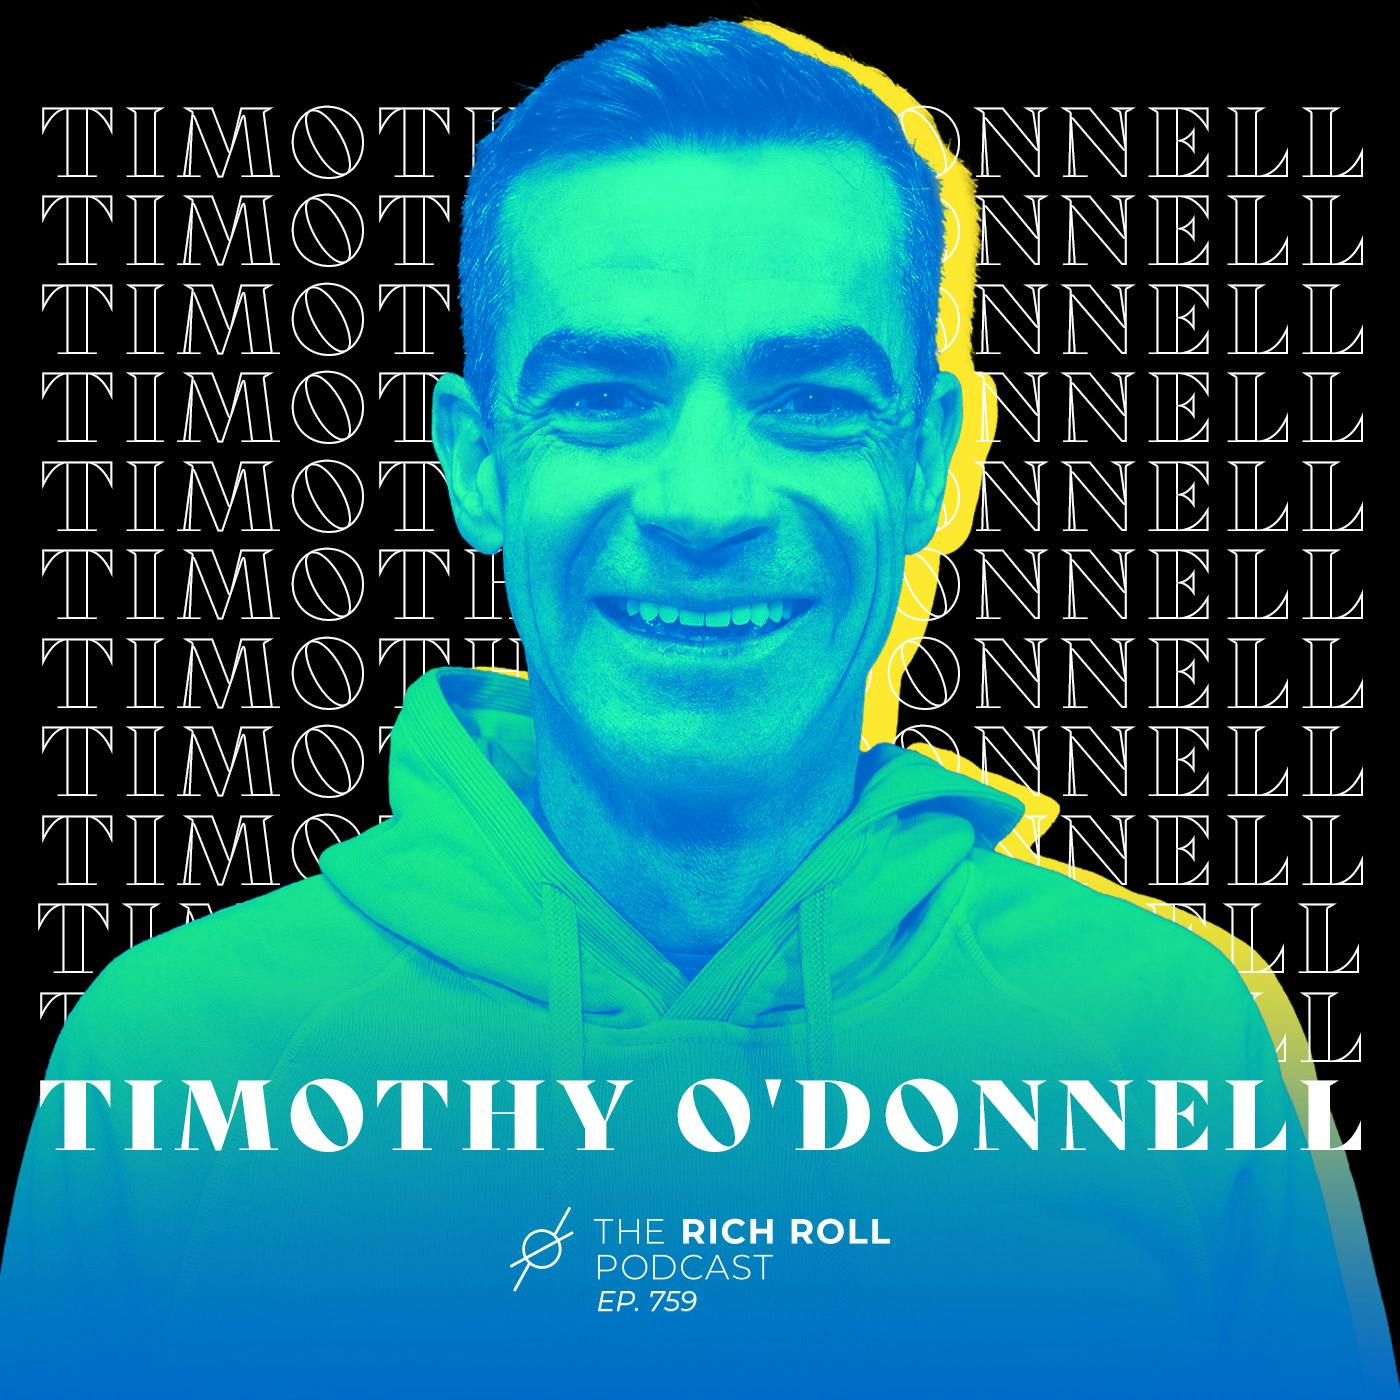 The Elite Ironman Who Survived a Mid-Race Heart Attack: Tim O'Donnell on Mental Fitness, His Brush with Death & Finding Joy In Training